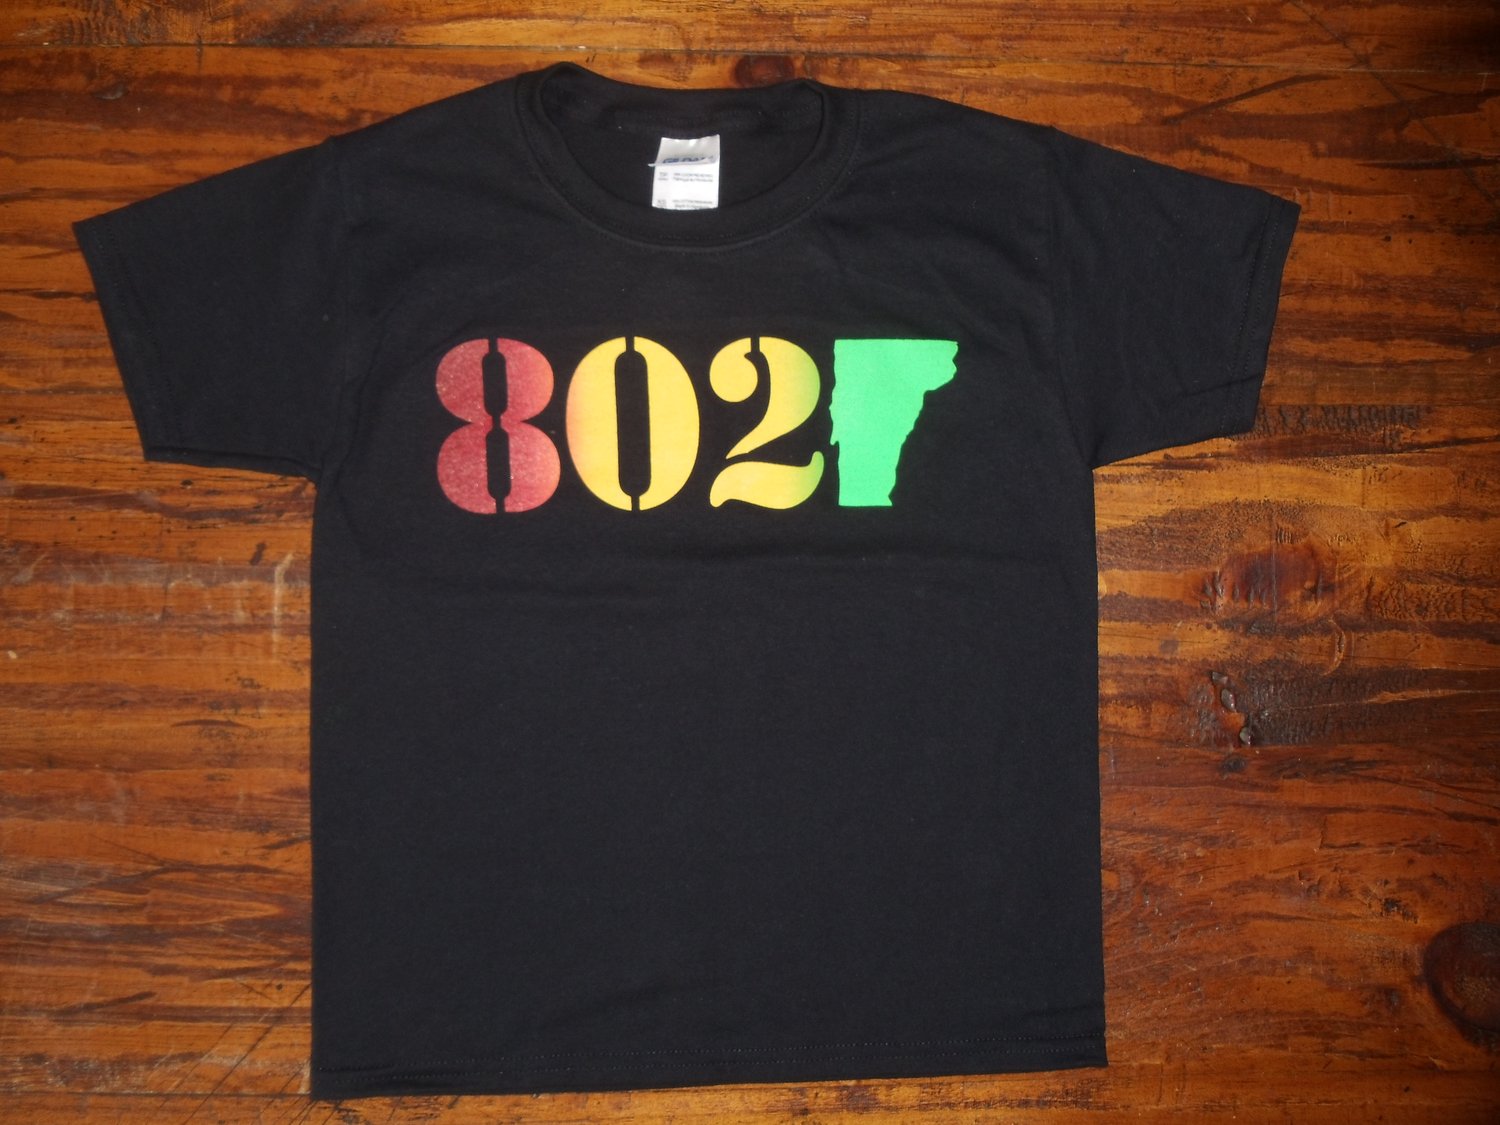 Image of 802 Classic Vermont T-Shirt - 802 on a Black Shirt - Toddler, Kids Youth & Adult (Men's & Women's)